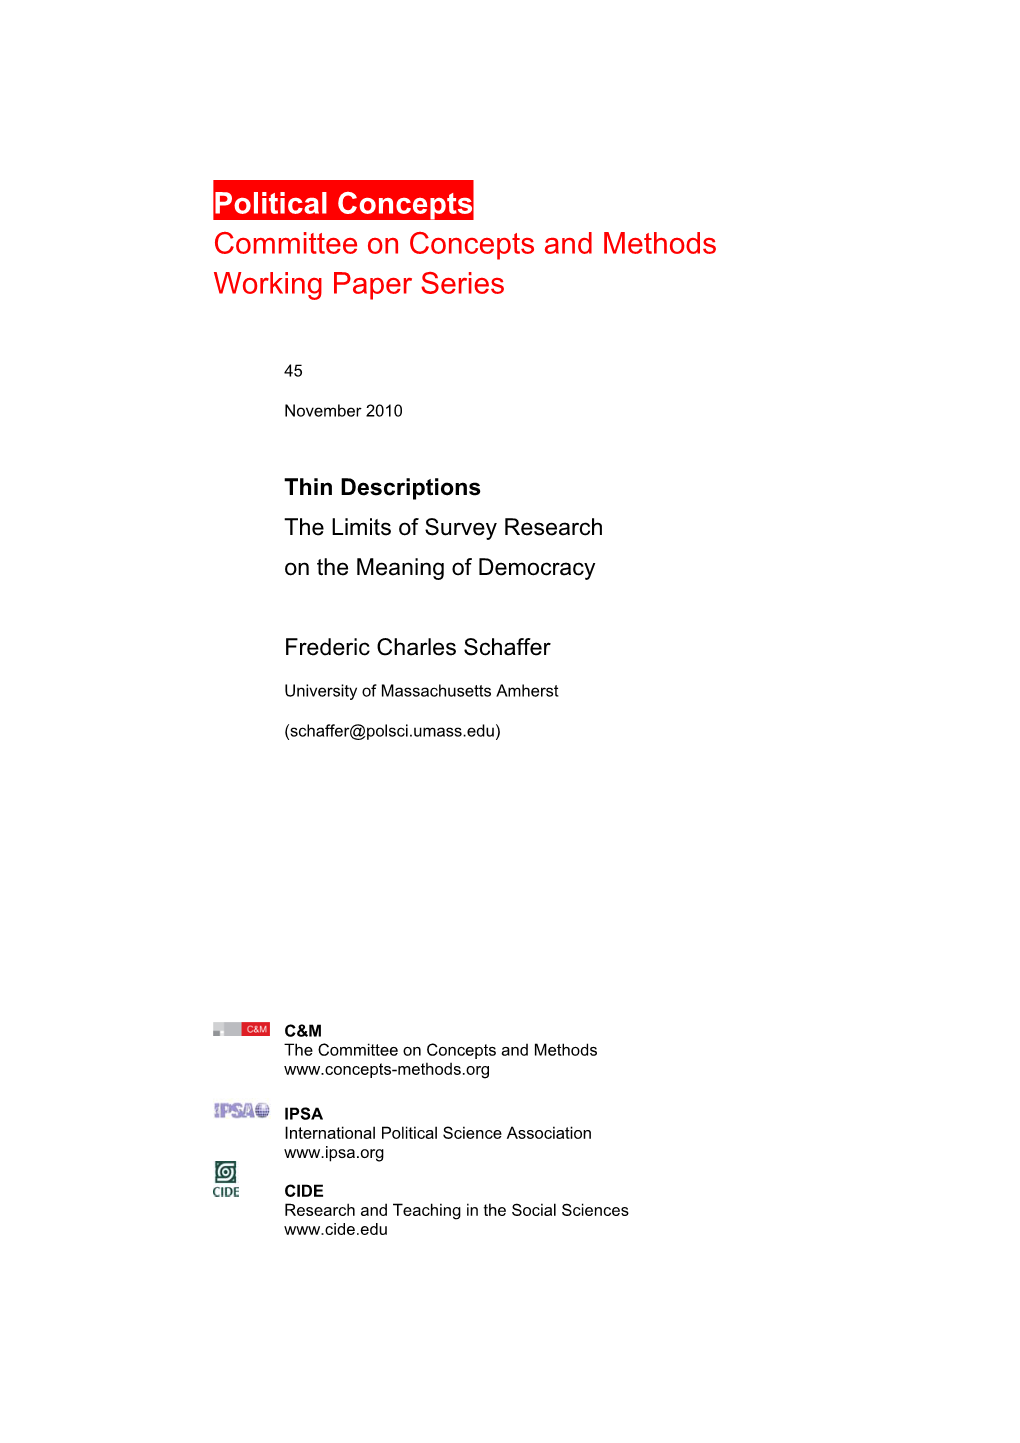 Committee on Concepts and Methods Working Paper Series